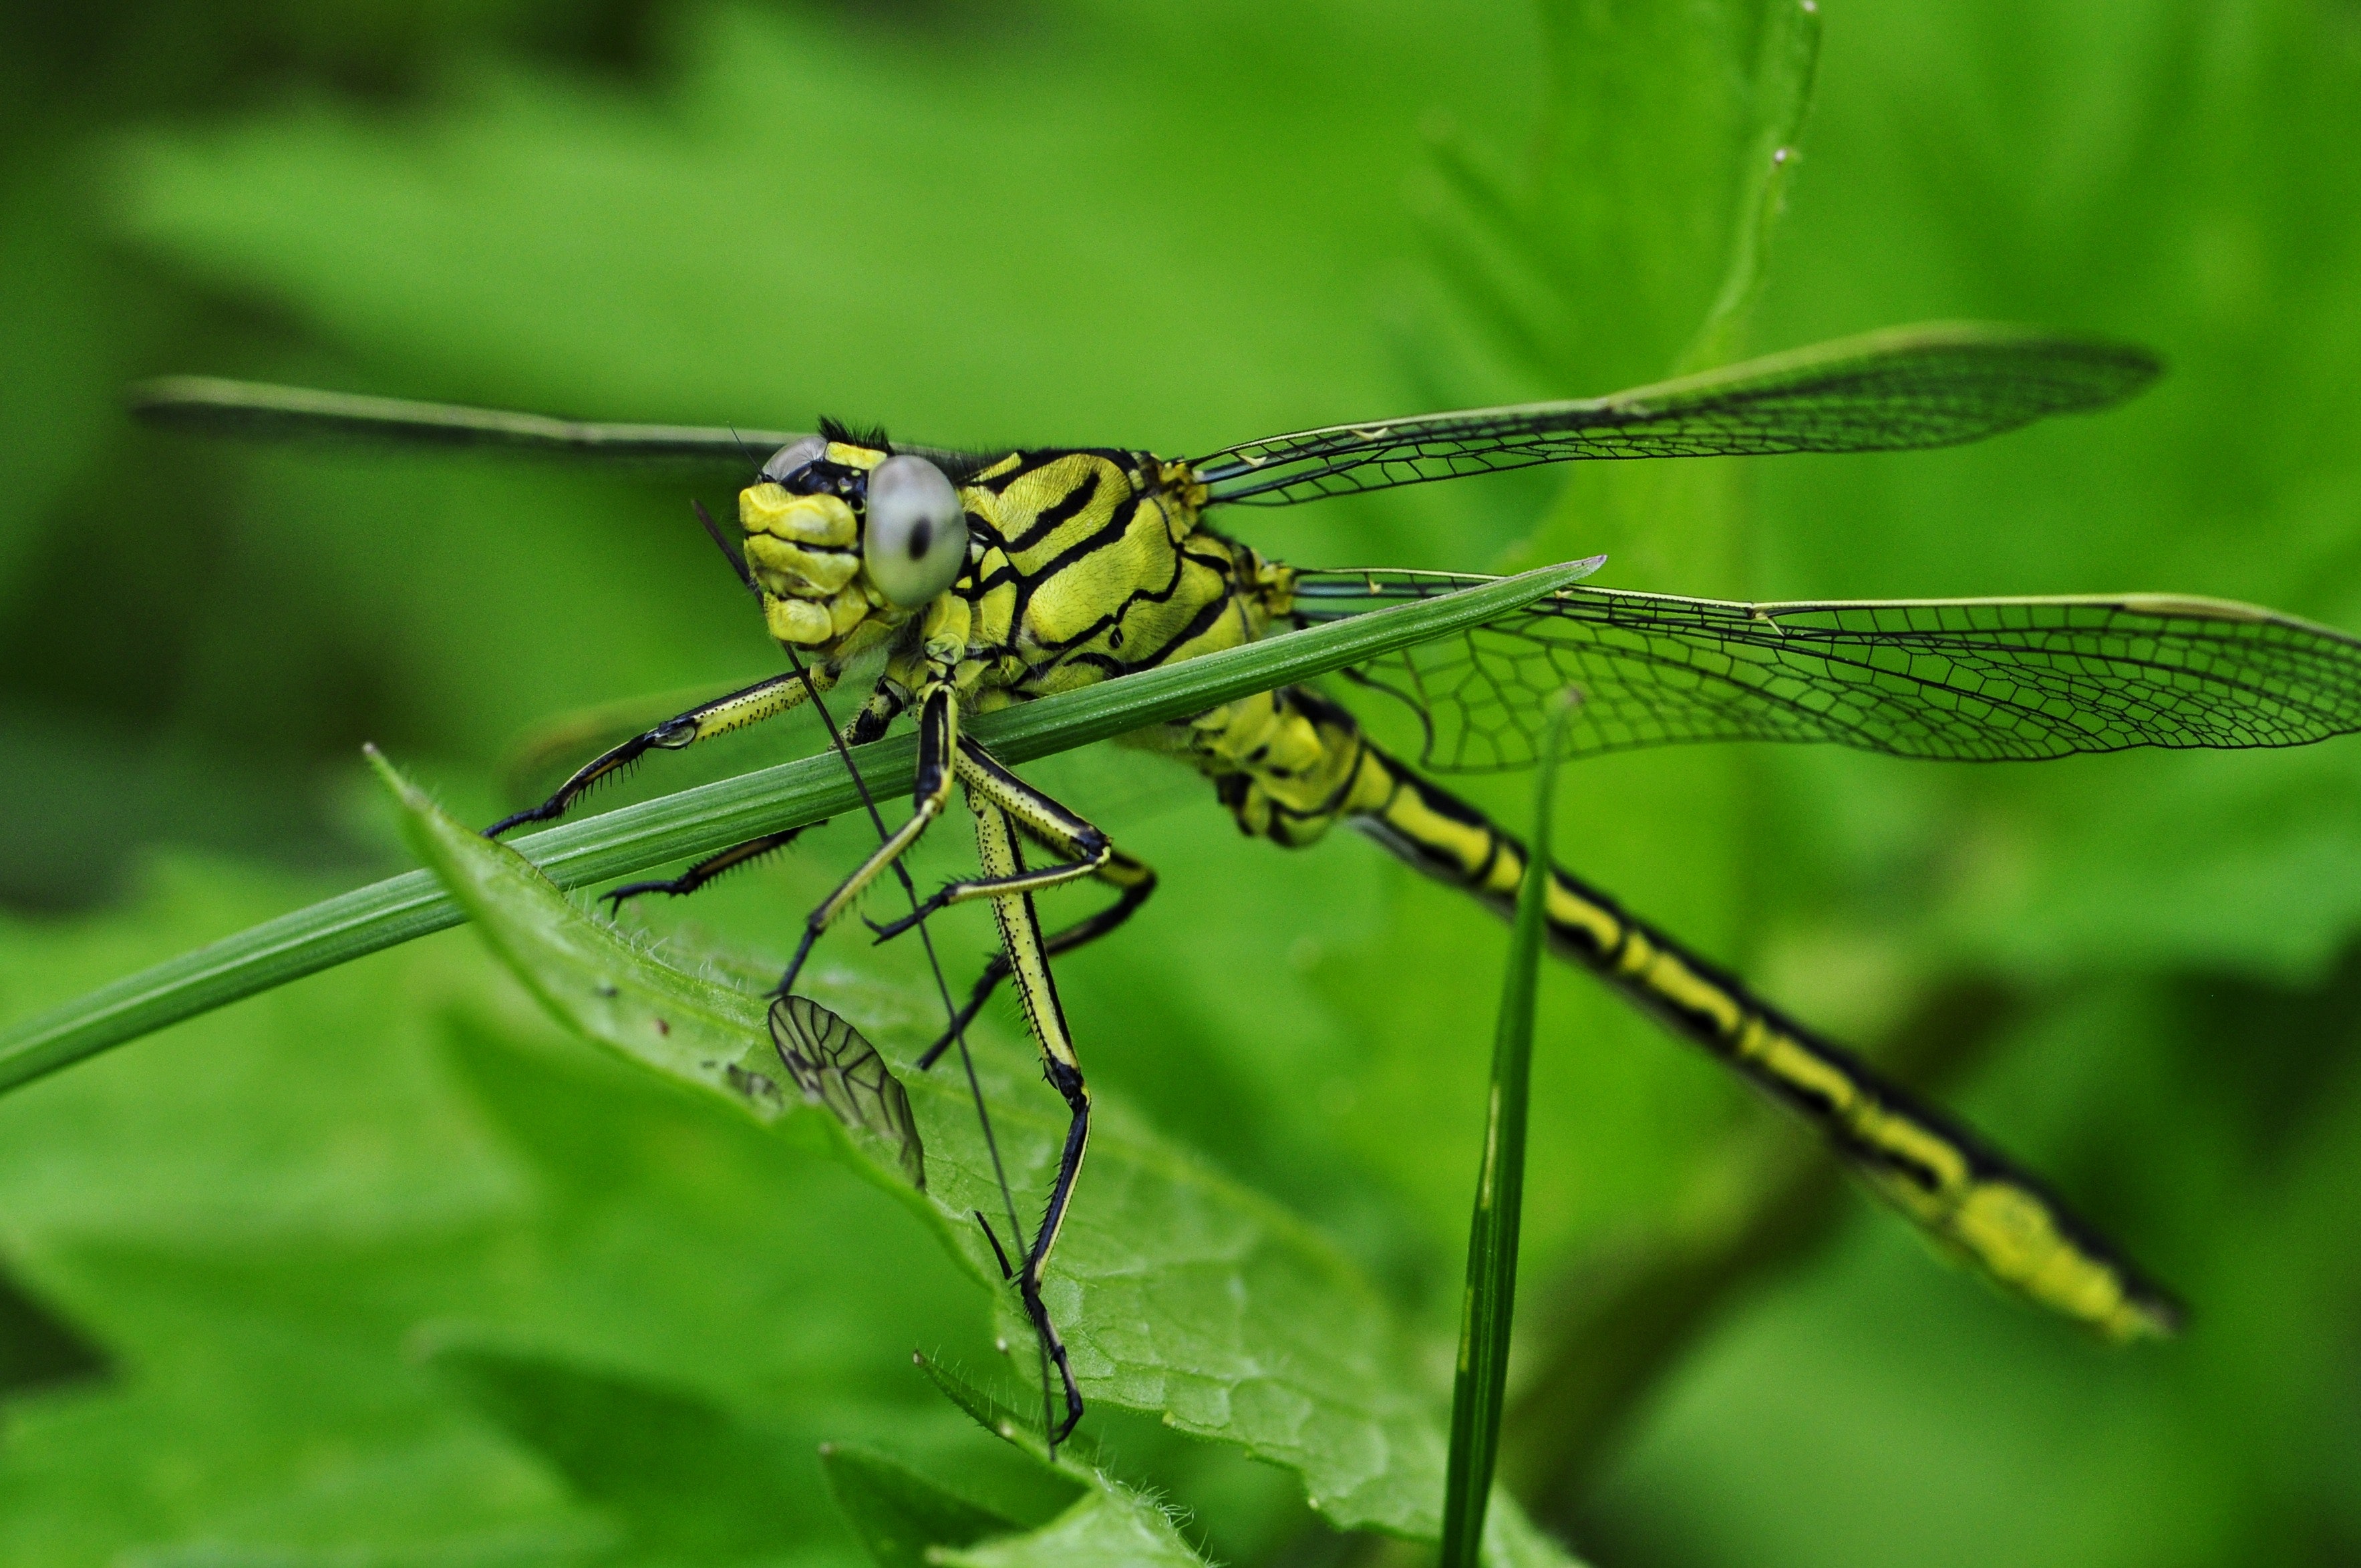 Green and Black Dragonfly on Green Leaf during Daytime · Free Stock ...